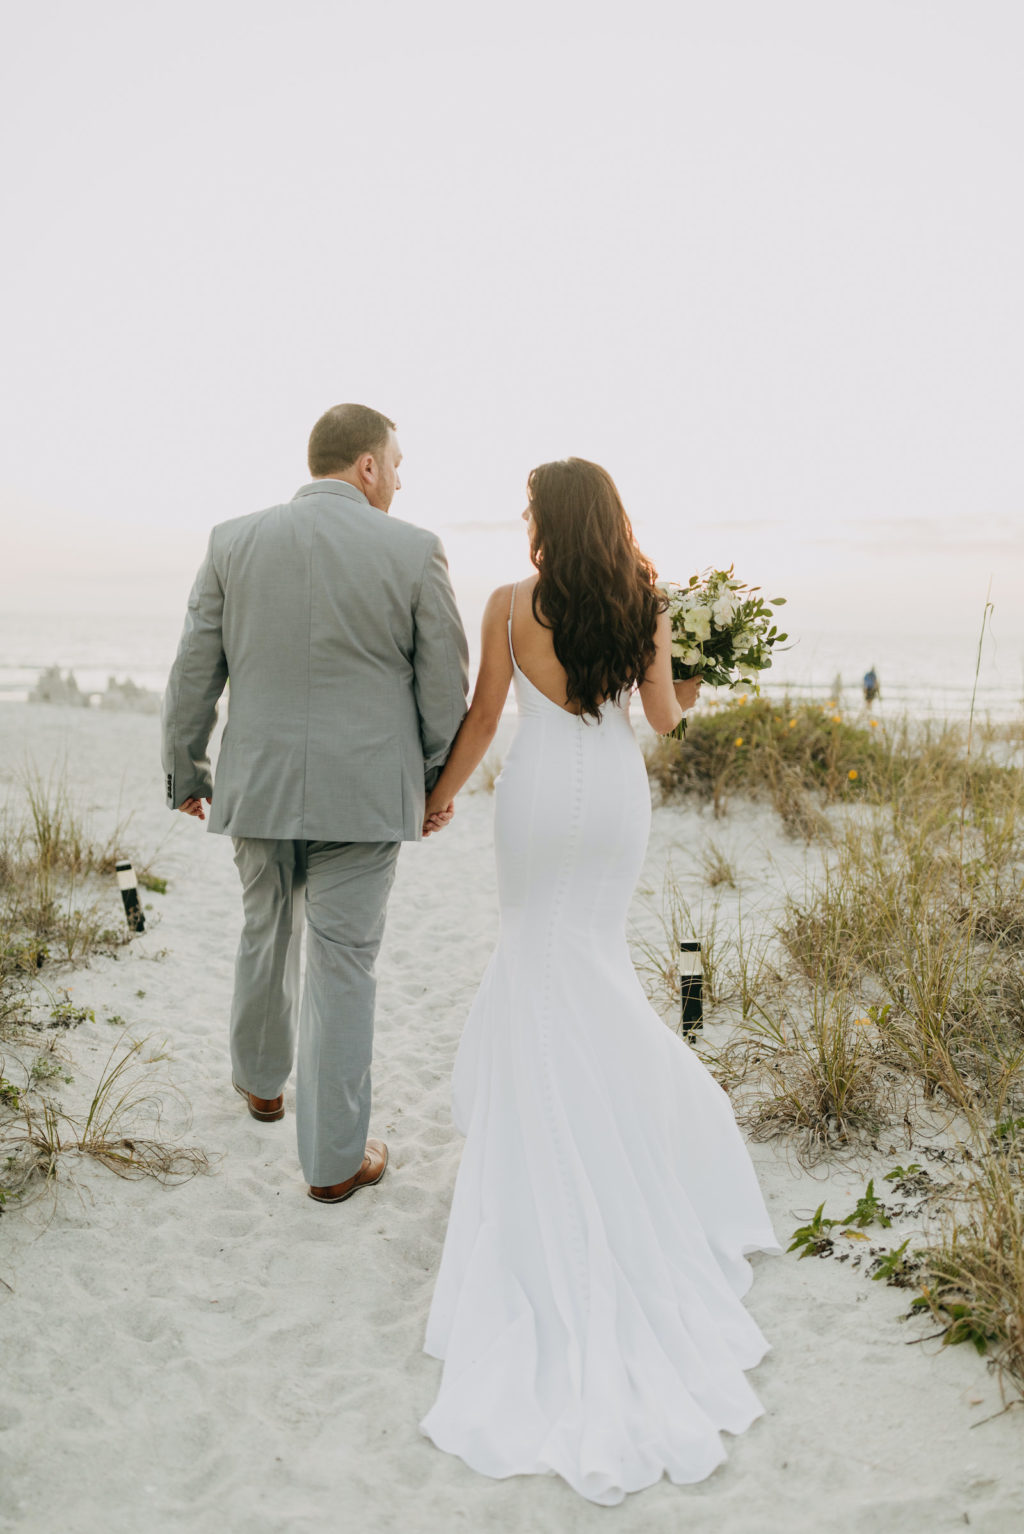 Spaghetti Strap Casablanca Ivory Simple Slip Wedding Dress Bridal Gown | Light Blue Grey Groom Suit | Outdoor Bride and Groom Beach Portrait at Tampa St Pete Florida COVID Destination Elopement Beach Wedding Ceremony | Amber McWhorter Photography